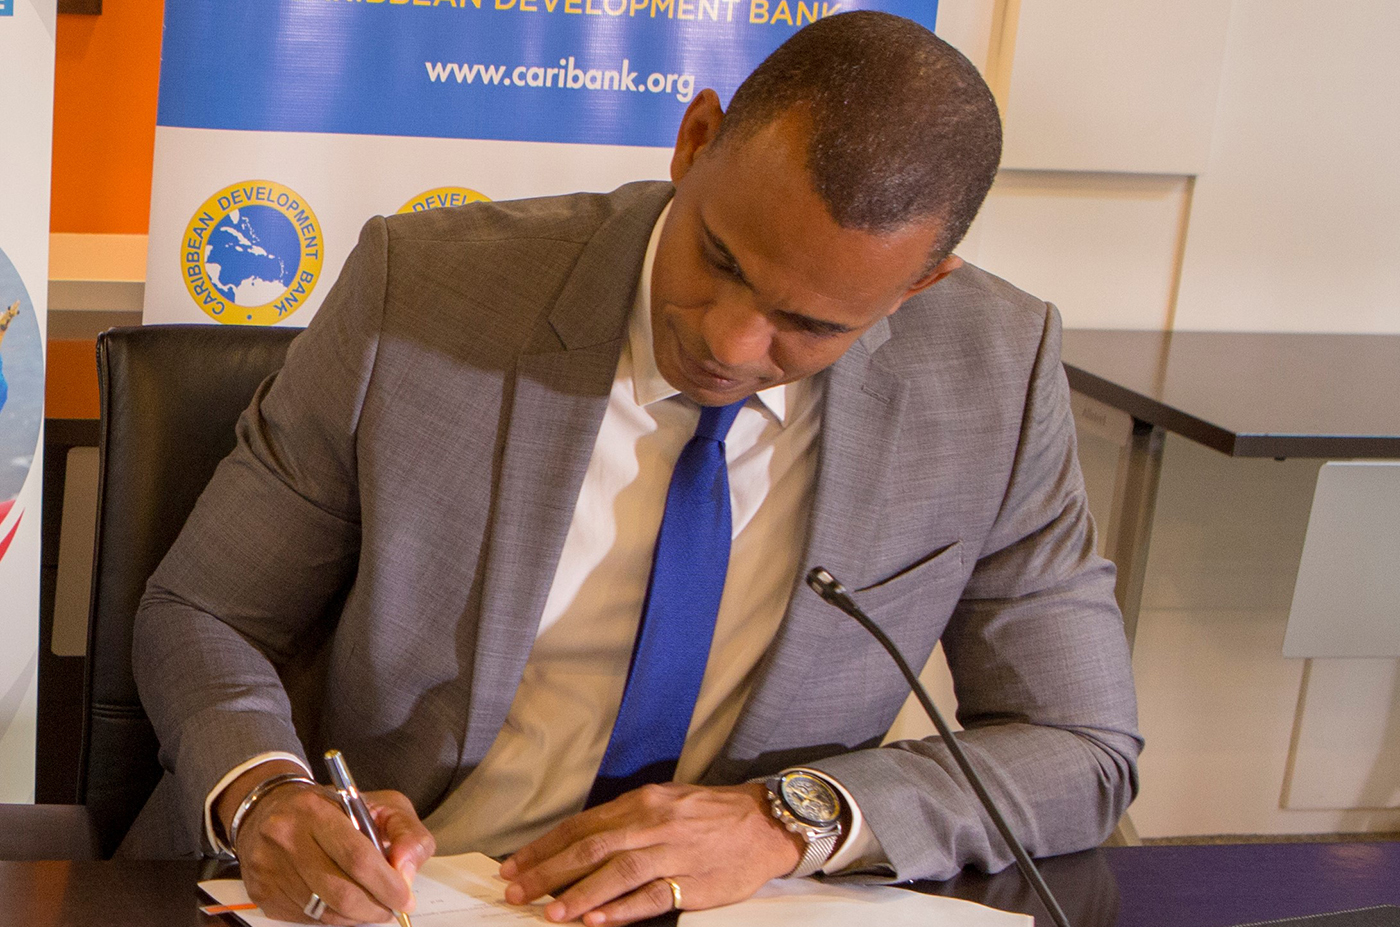 Daniel Best wearing grey suit with blue tie signing document.